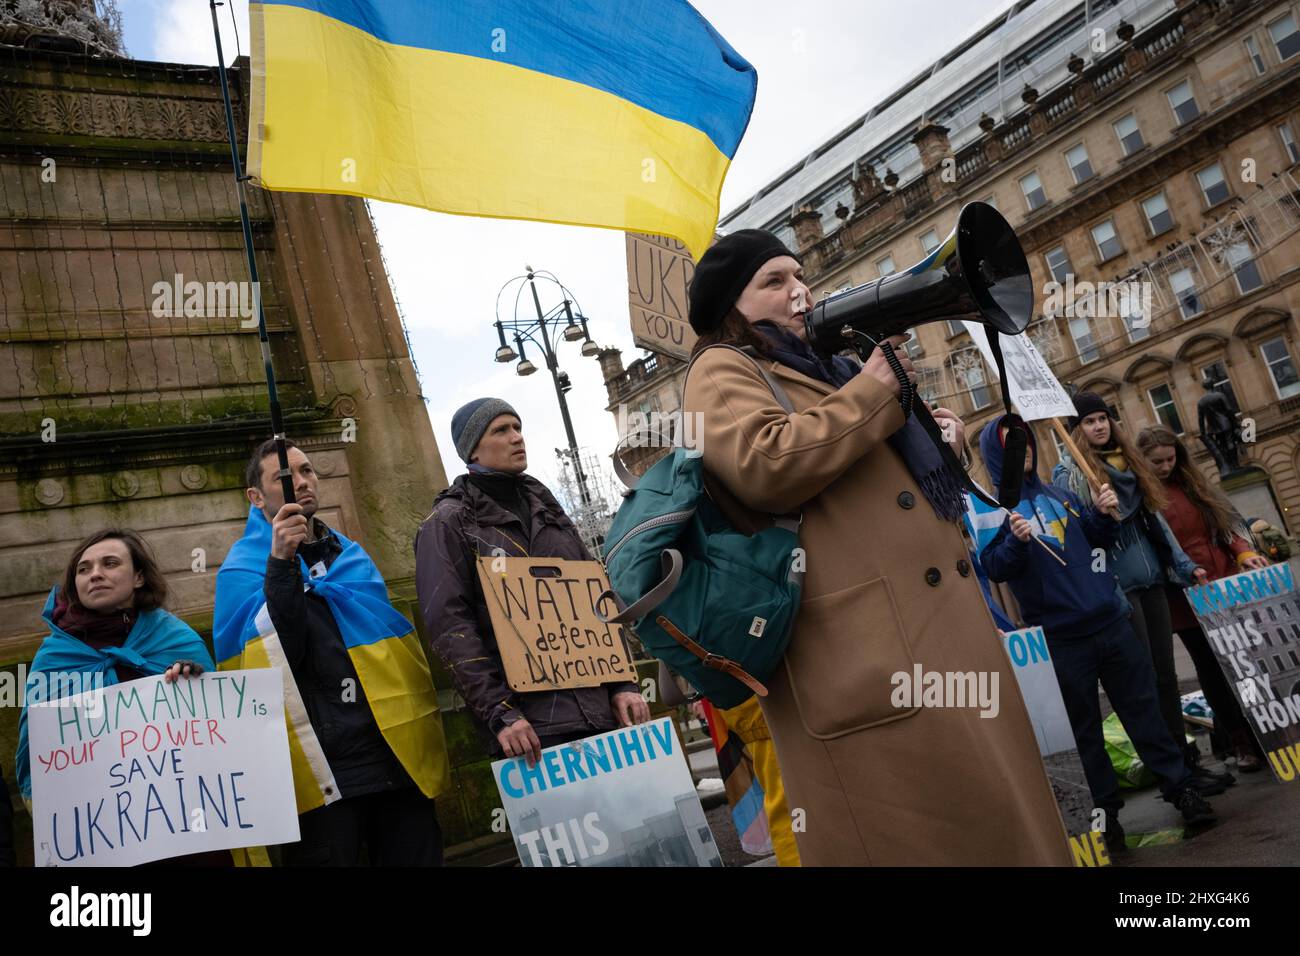 Glasgow, UK, 12 March 2022. Susan Aitken, leader of Glasgow City Council speaks at the Stand With Ukraine rally in George Square, showing support for Ukraine in their current war with President PutinÕs Russia, in Glasgow, Scotland, 12 March 2022. Photo credit: Jeremy Sutton-Hibbert/ Alamy Live News. Stock Photo